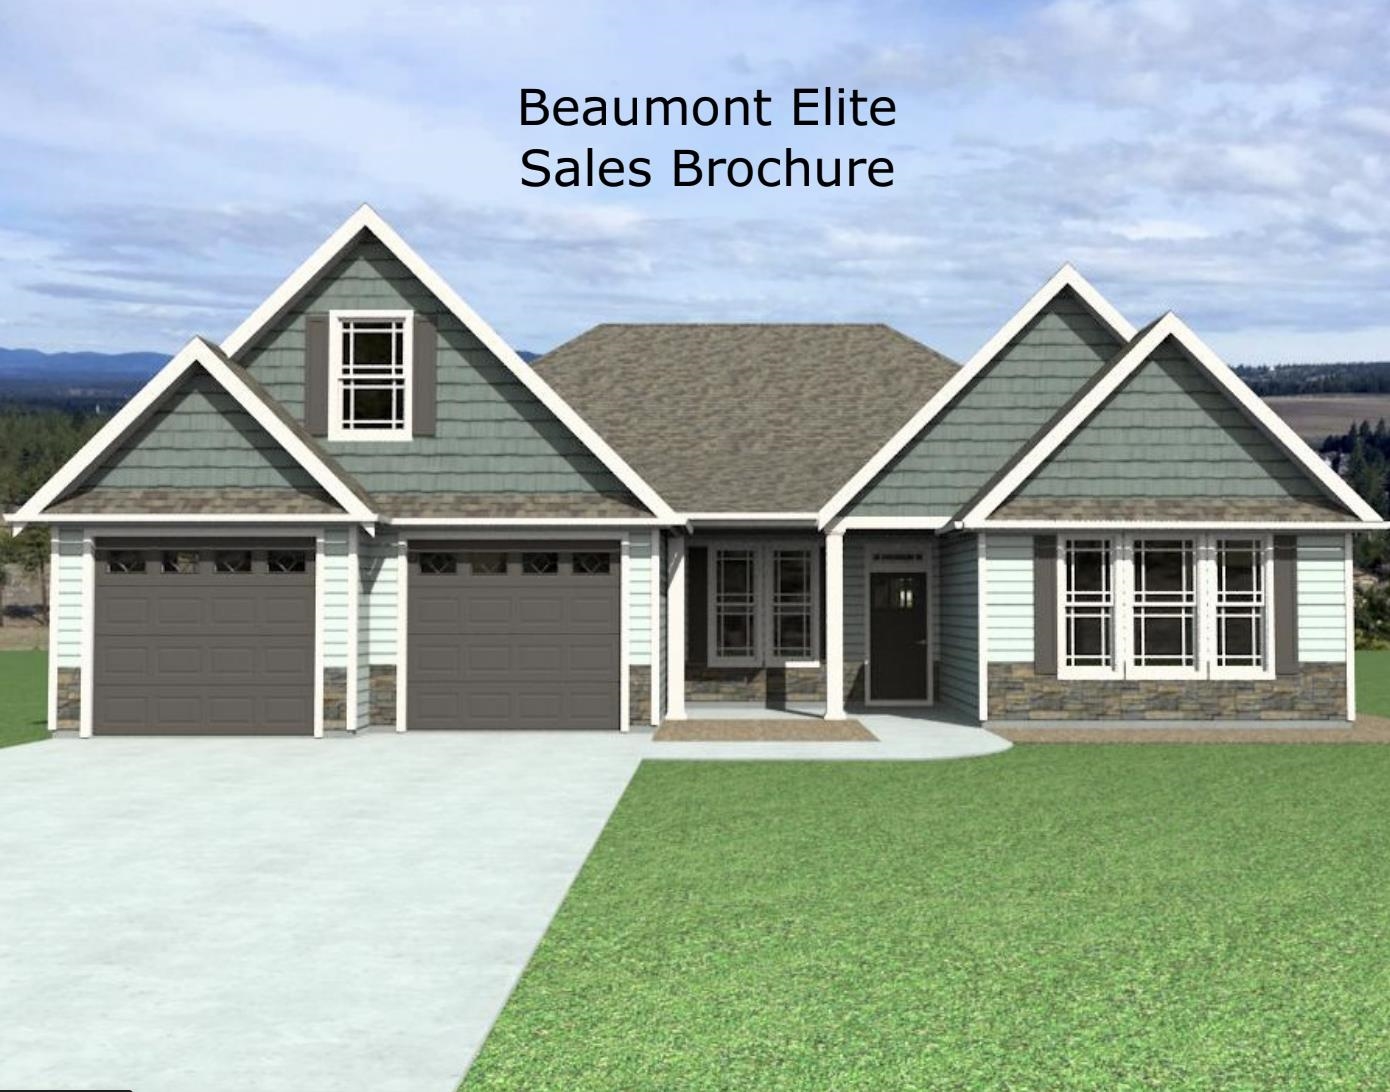 The BEAUMONT ELITE floor plan is an open concept home featuring 3 bedrooms, 2.5 bathrooms, office/study plus a sunroom! Walk-in pantry, and large kitchen with extended cabinets, island and nook. Quartz counters throughout. Standard features in this home include concrete plank and stone exterior, architectural shingles, soffit exterior lighting, 11-foot ceilings in LR & Kitchen, crown molding with rope lighting in the primary bedroom and living room. 12"x24" ceramic tile floors in baths & laundry. Large, tiled shower with accent in the primary bathroom, electric water heater, large covered back deck and more! Request the finish list for this beautiful home!  Preferred lender & attorney closing cost incentives!!! Lot 12